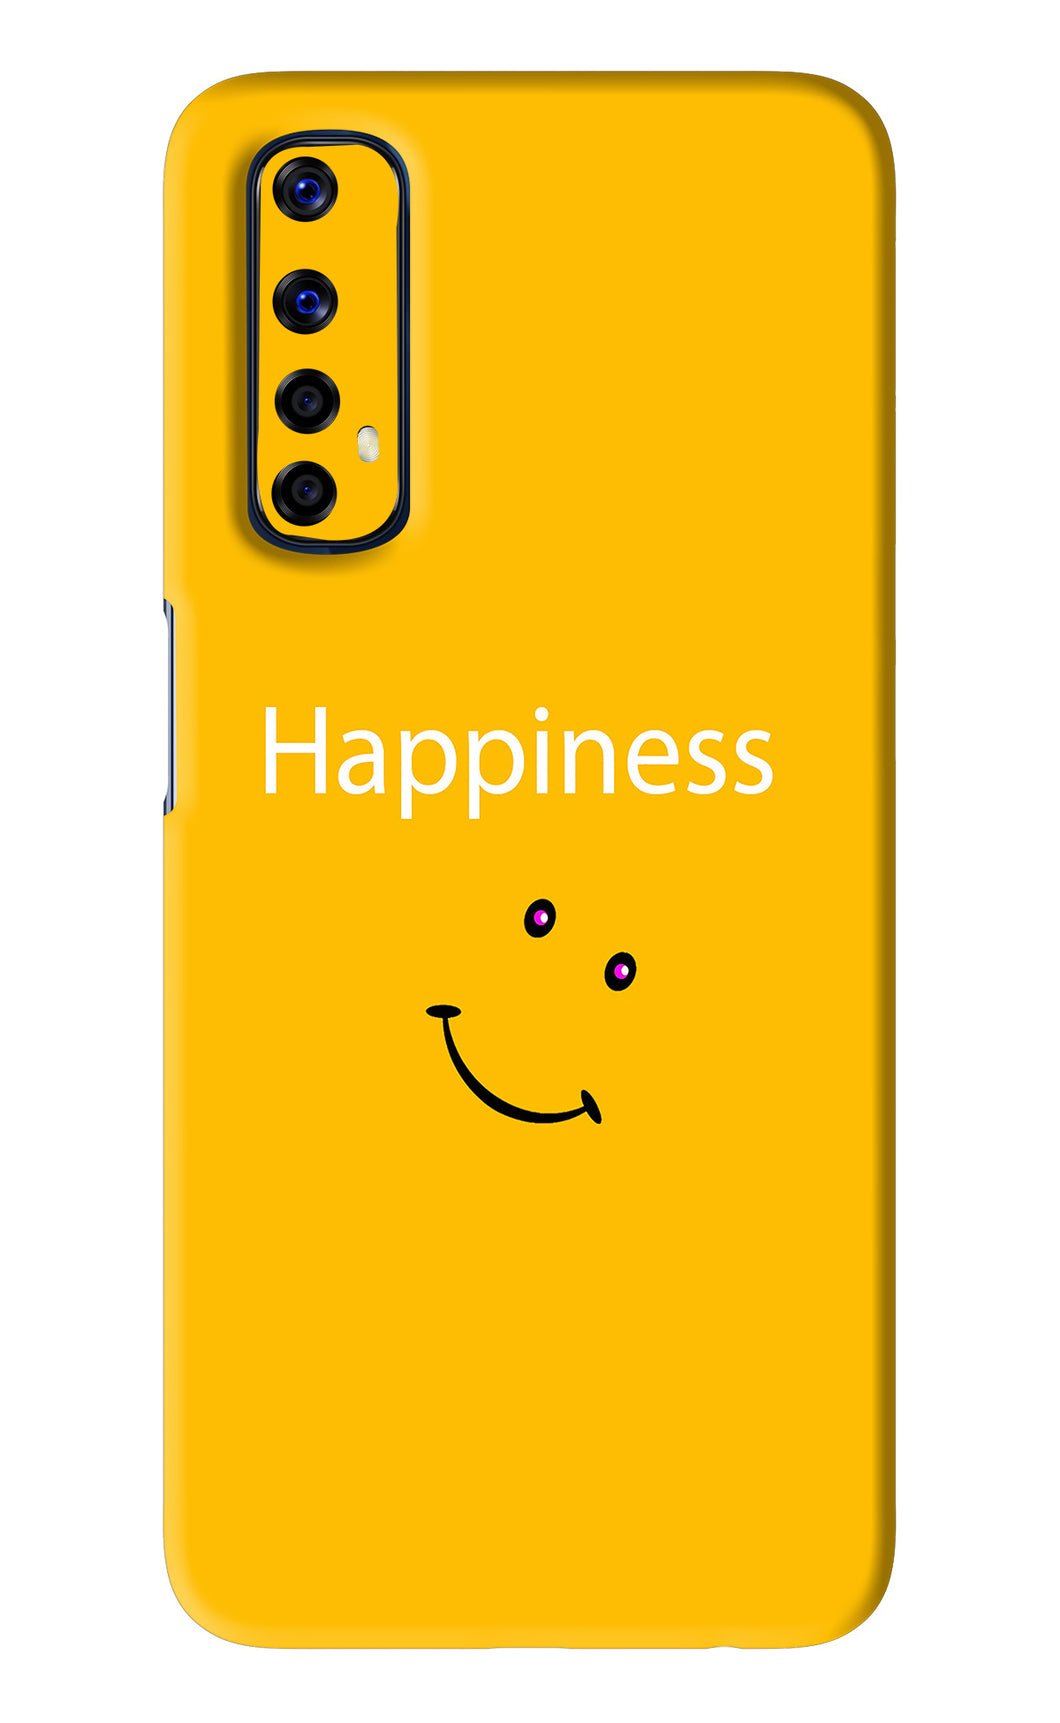 Happiness With Smiley Realme Narzo 20 Pro Back Skin Wrap